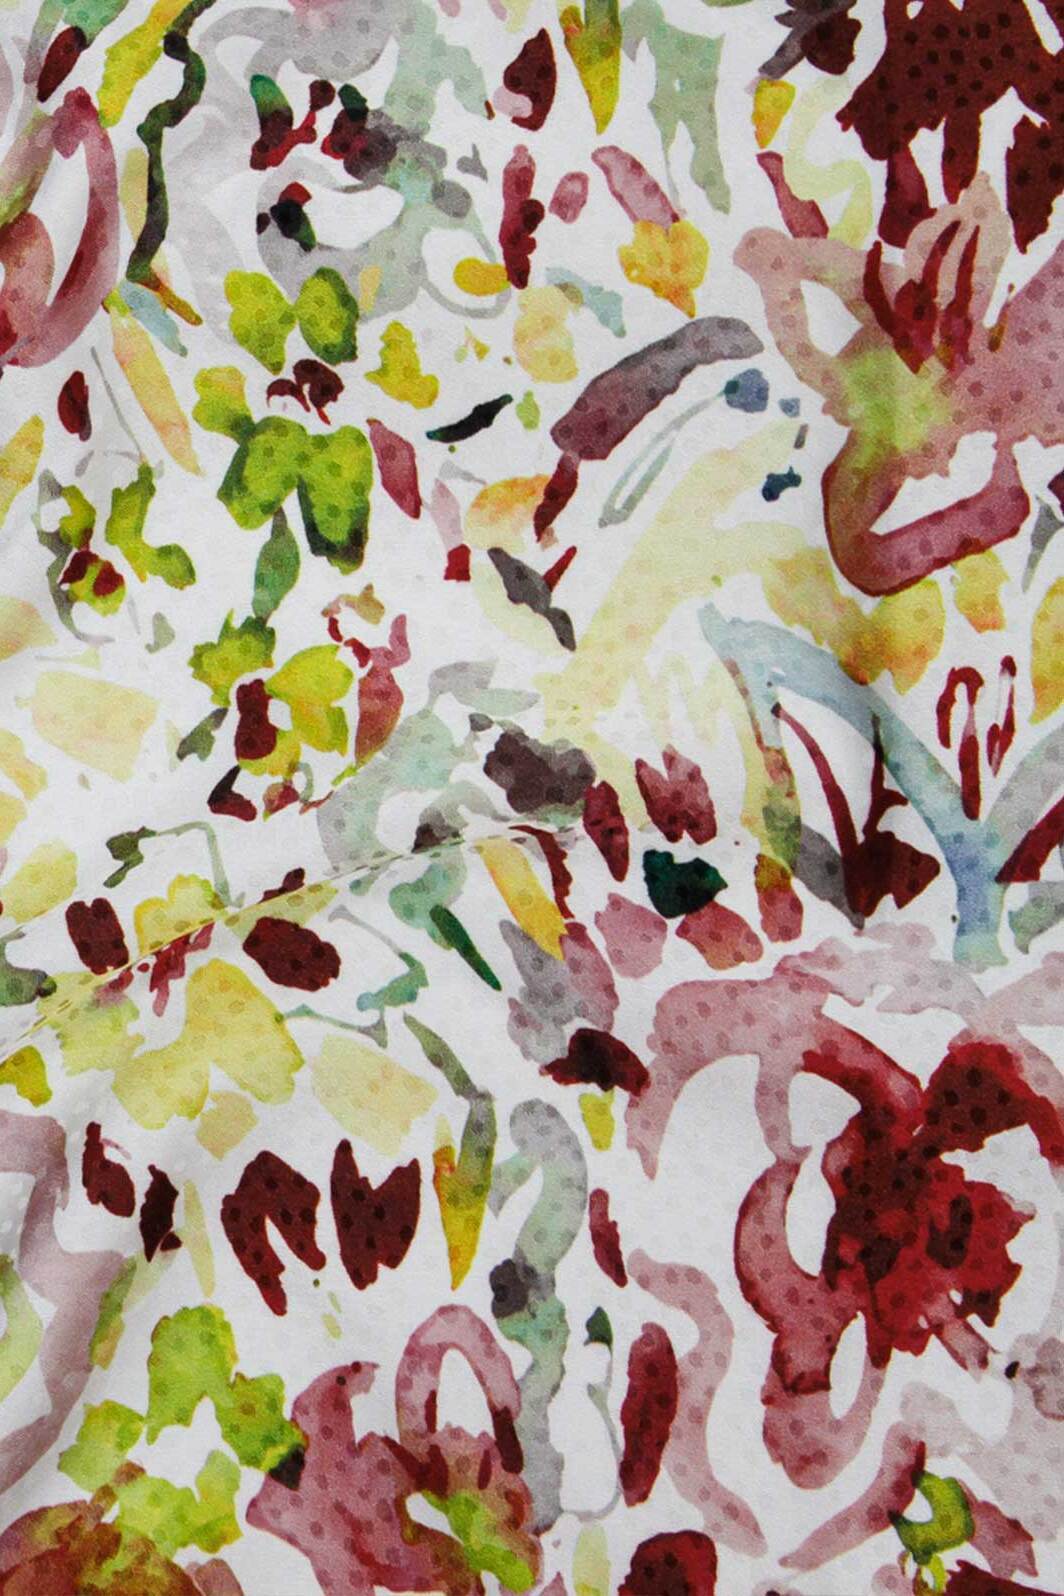 Digital Abstract Floral Jacquard White / Wine / Citrus